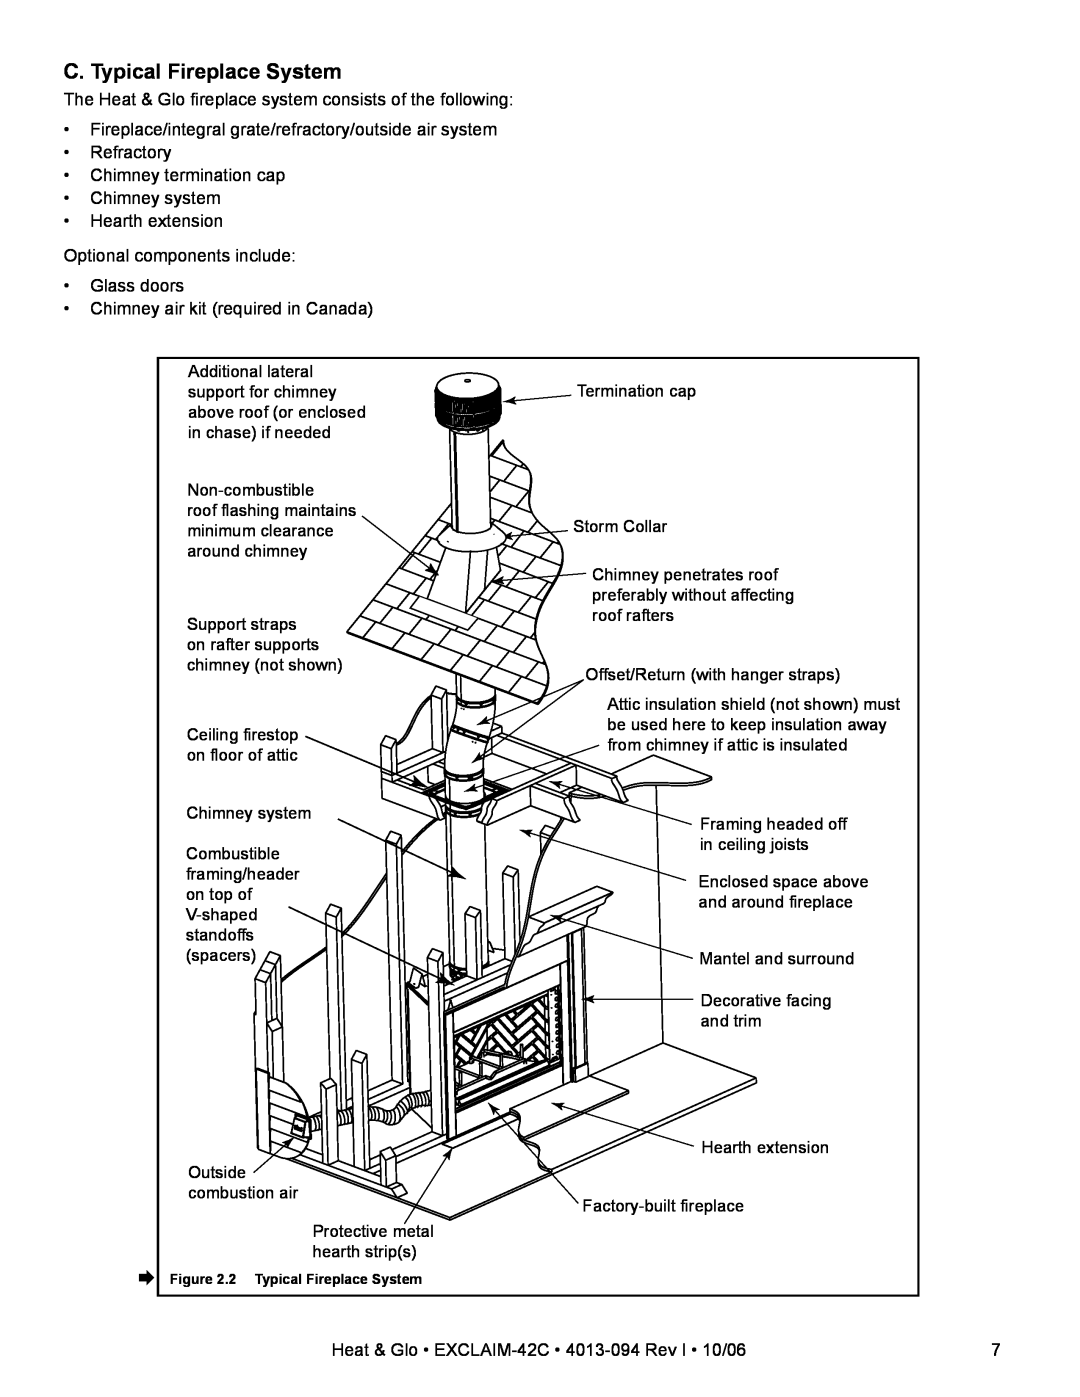 Heat & Glo LifeStyle EXCLAIM-42T-C, EXCLAIM-42H-C owner manual C. Typical Fireplace System 